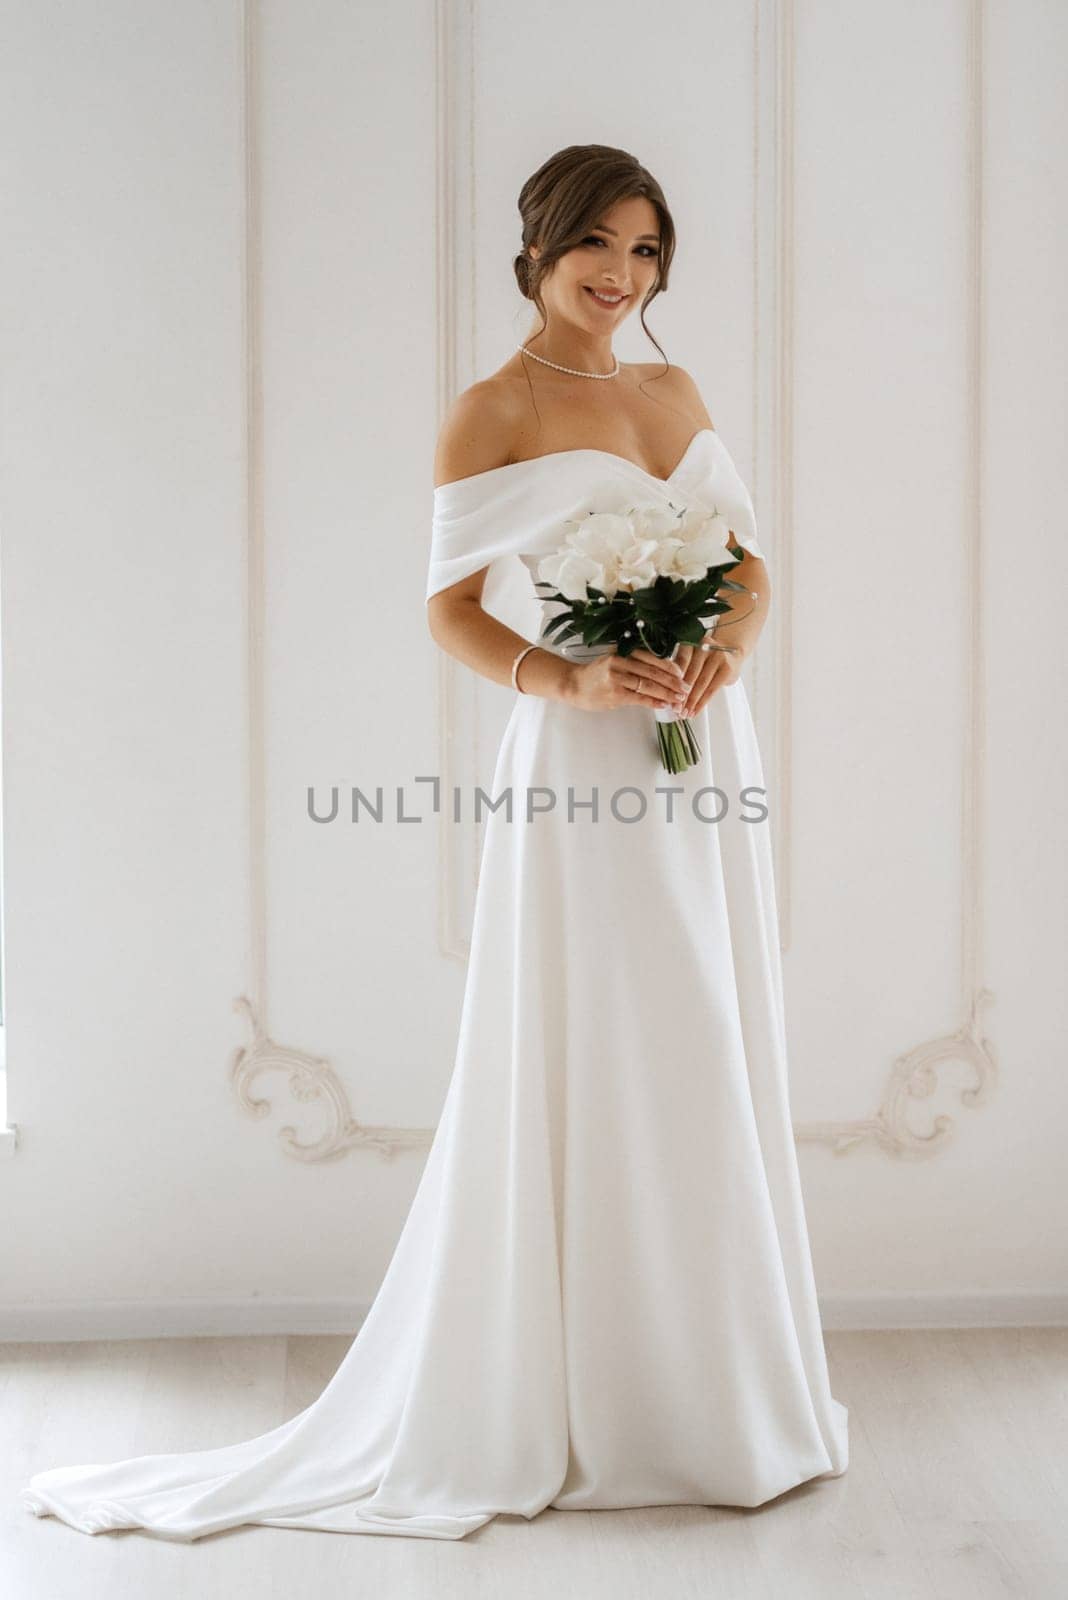 brunette bride in a tight wedding dress in a bright studio by Andreua